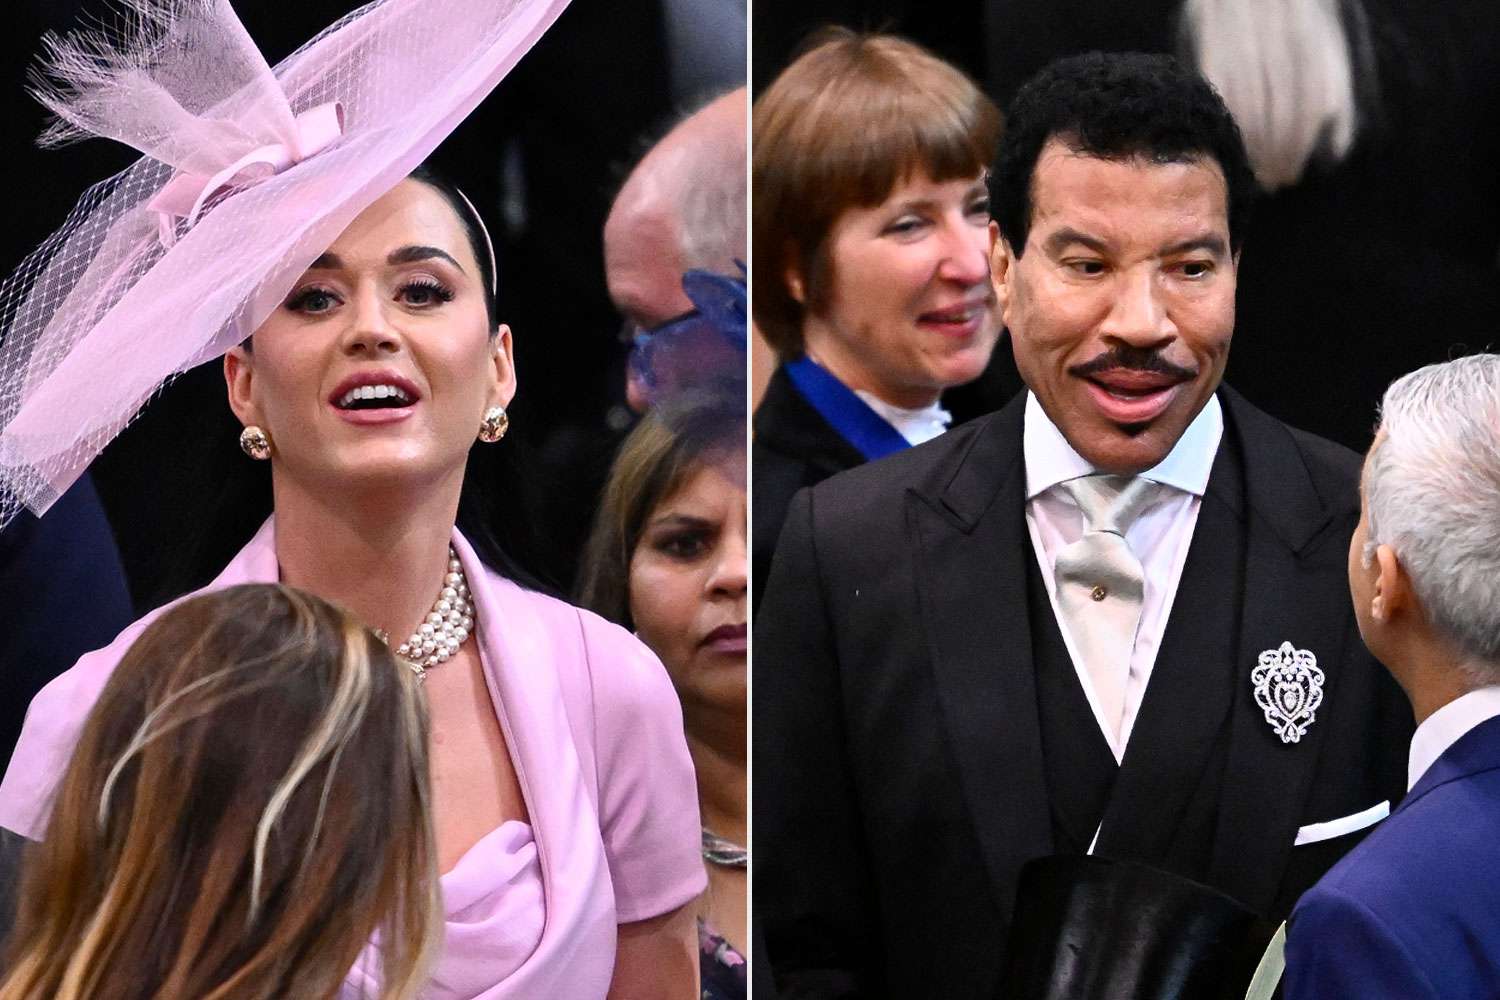 Katy Perry and Lionel Richie attend King Charles III's coronation before concert